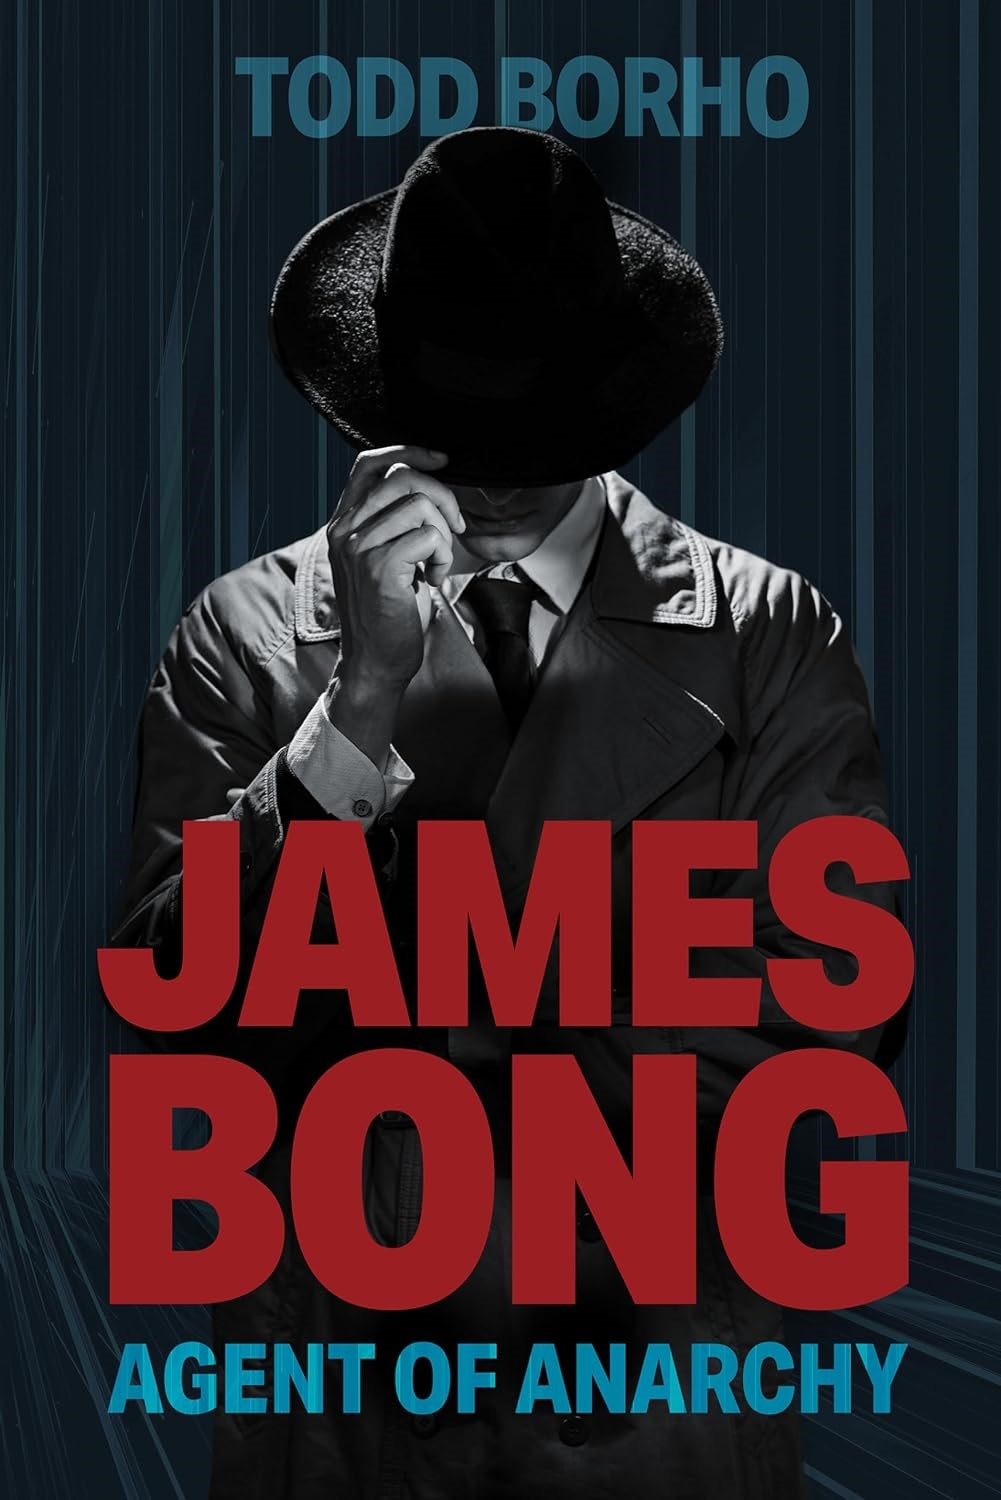 Todd Borho Unveils "James Bong: Agent of Anarchy" - A Hilarious and Action-Packed Spy Adventure